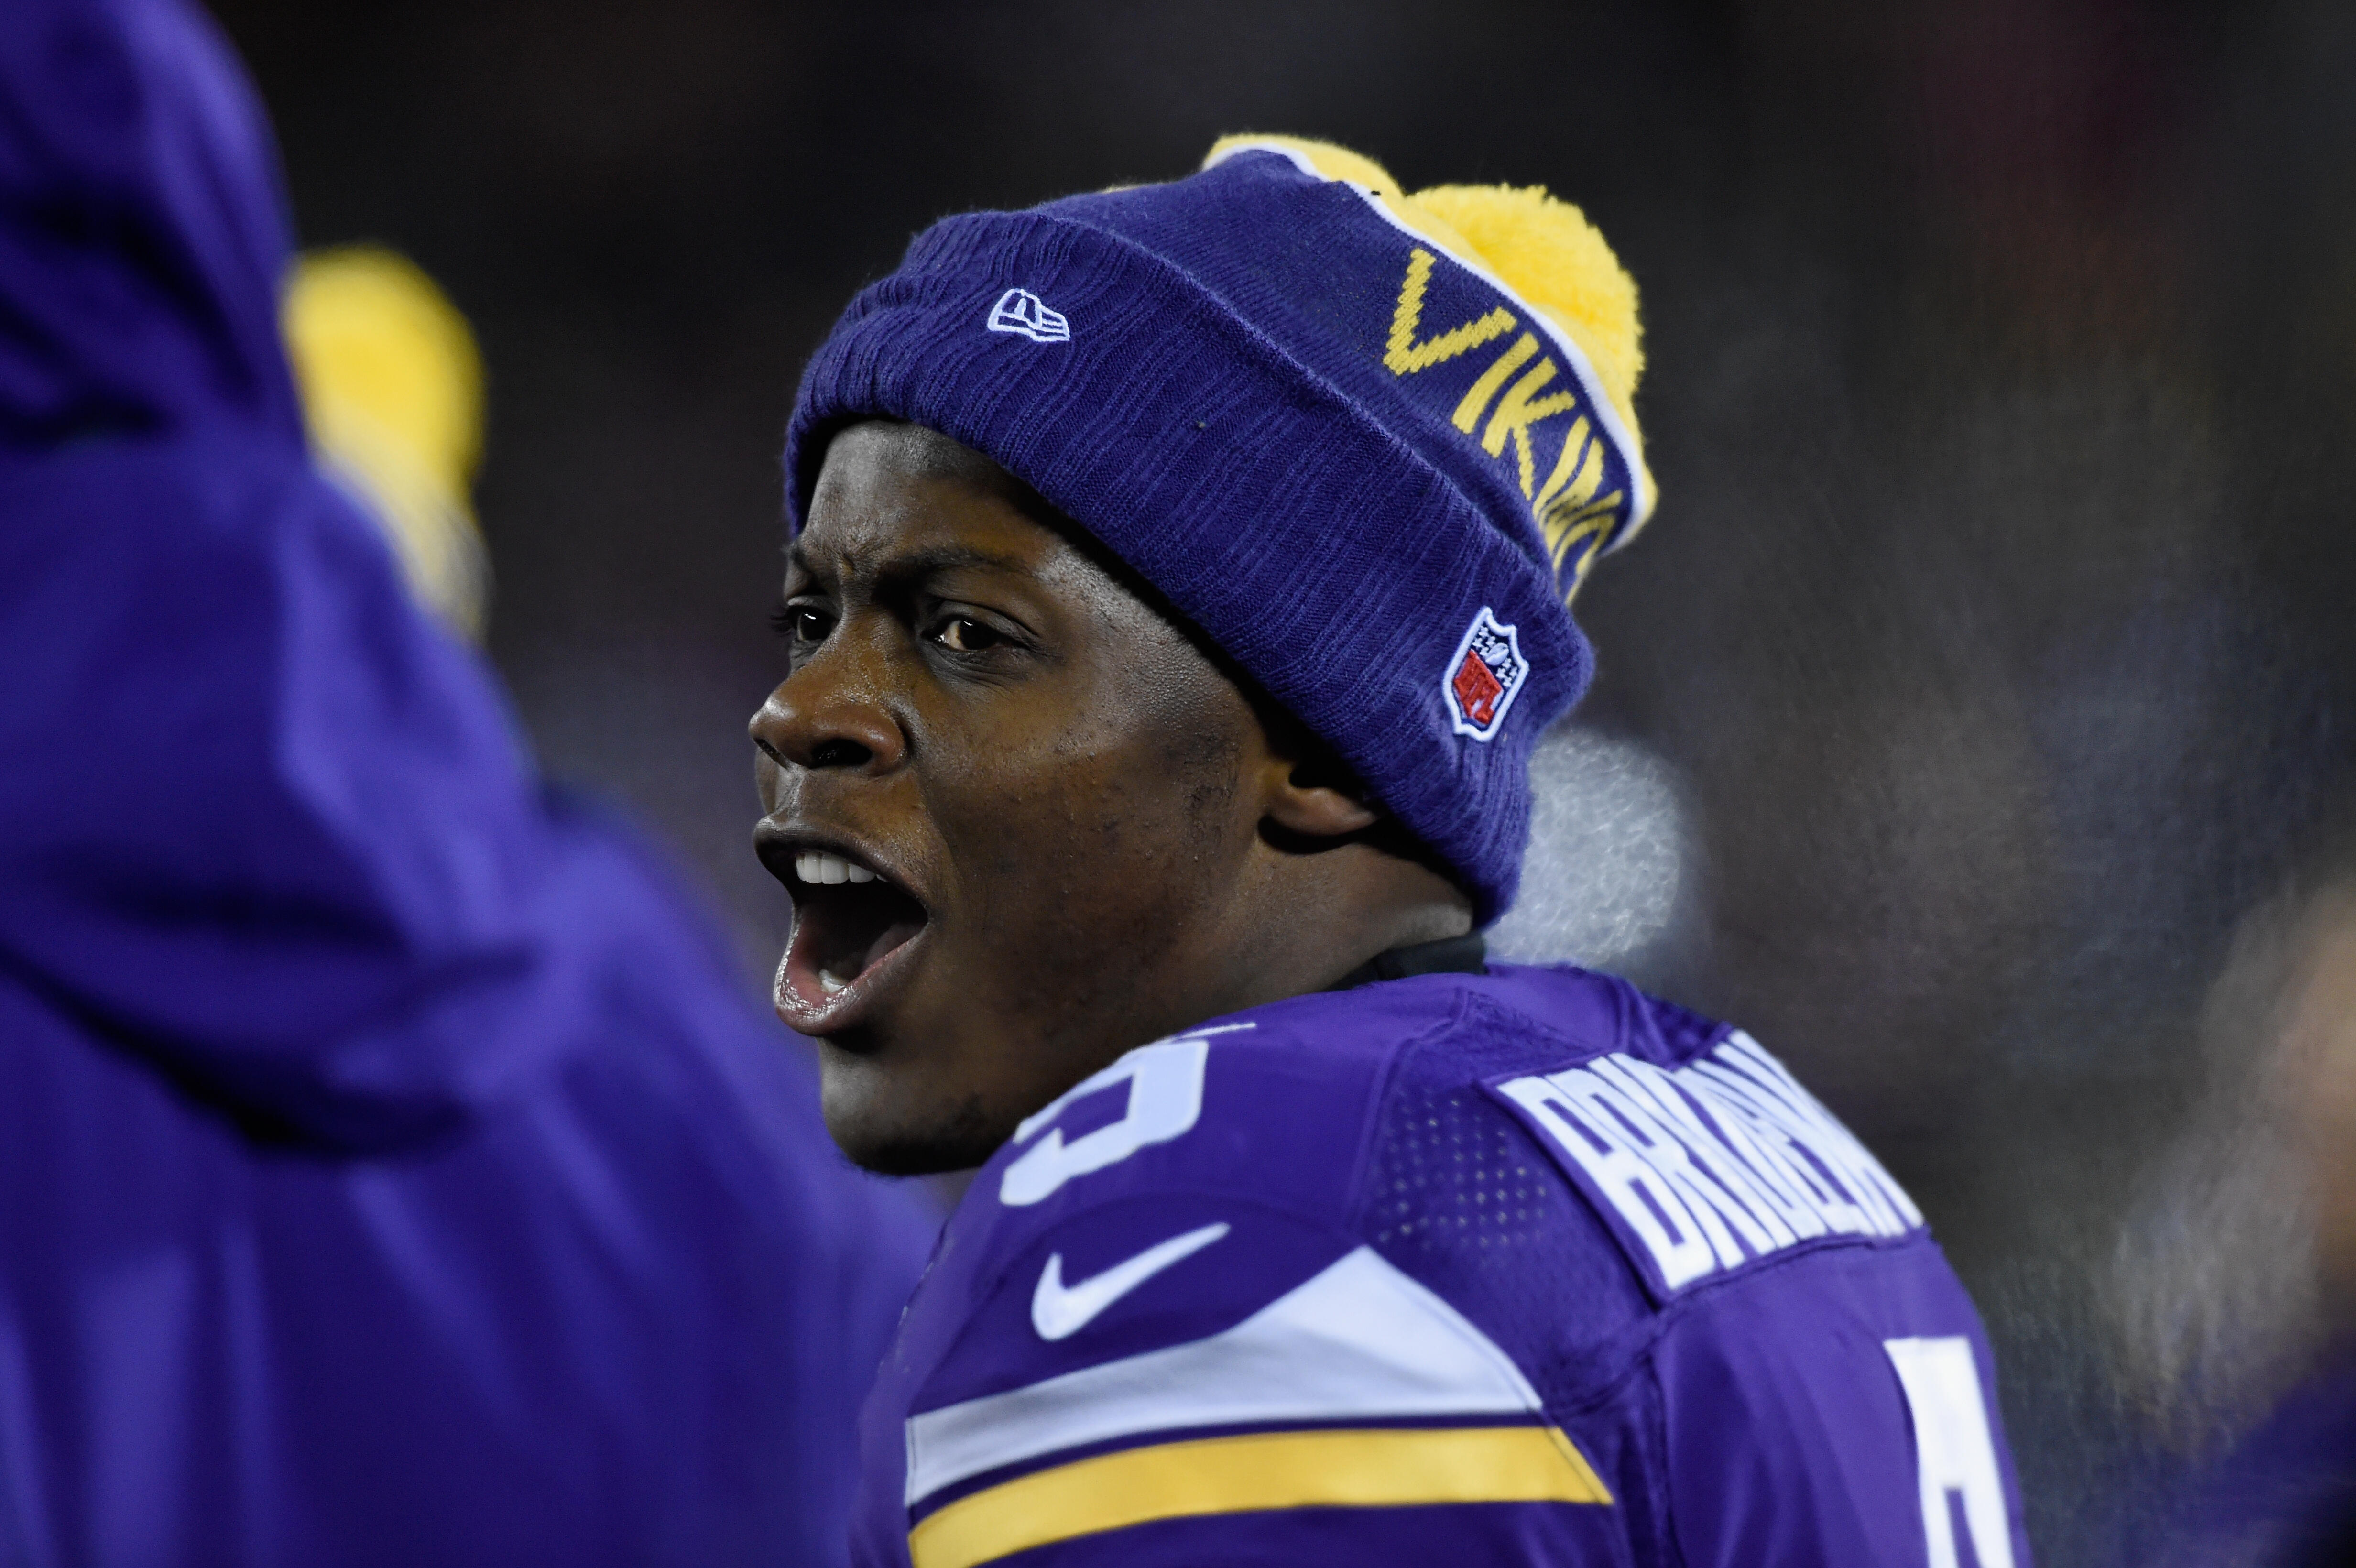 MINNEAPOLIS, MN - DECEMBER 27: Teddy Bridgewater #5 of the Minnesota Vikings looks on during the fourth quarter of the game against the New York Giants on December 27, 2015 at TCF Bank Stadium in Minneapolis, Minnesota. The Vikings defeated the Giants 49-